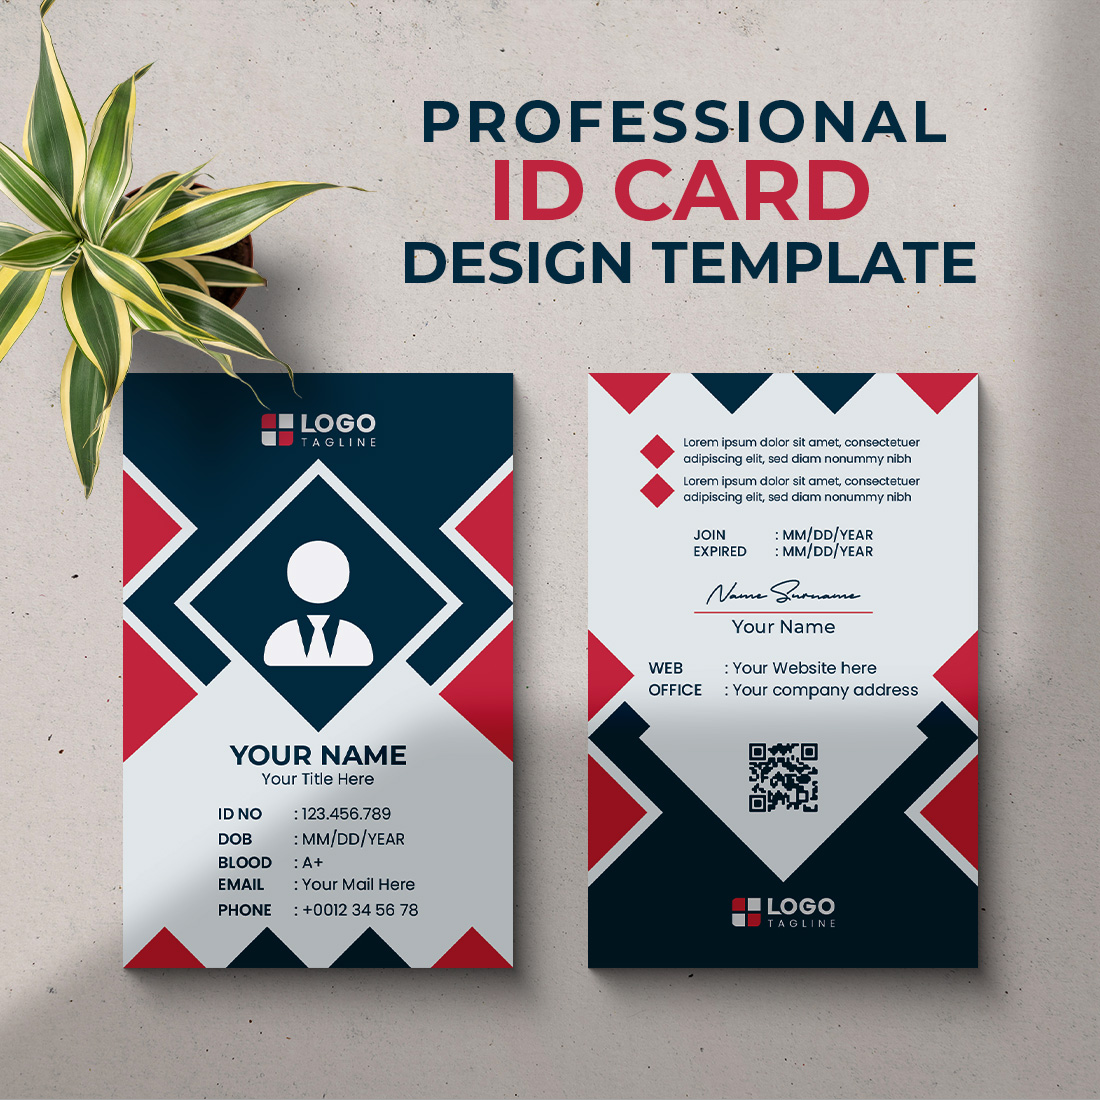 Professional id card design template with a plant next to it.